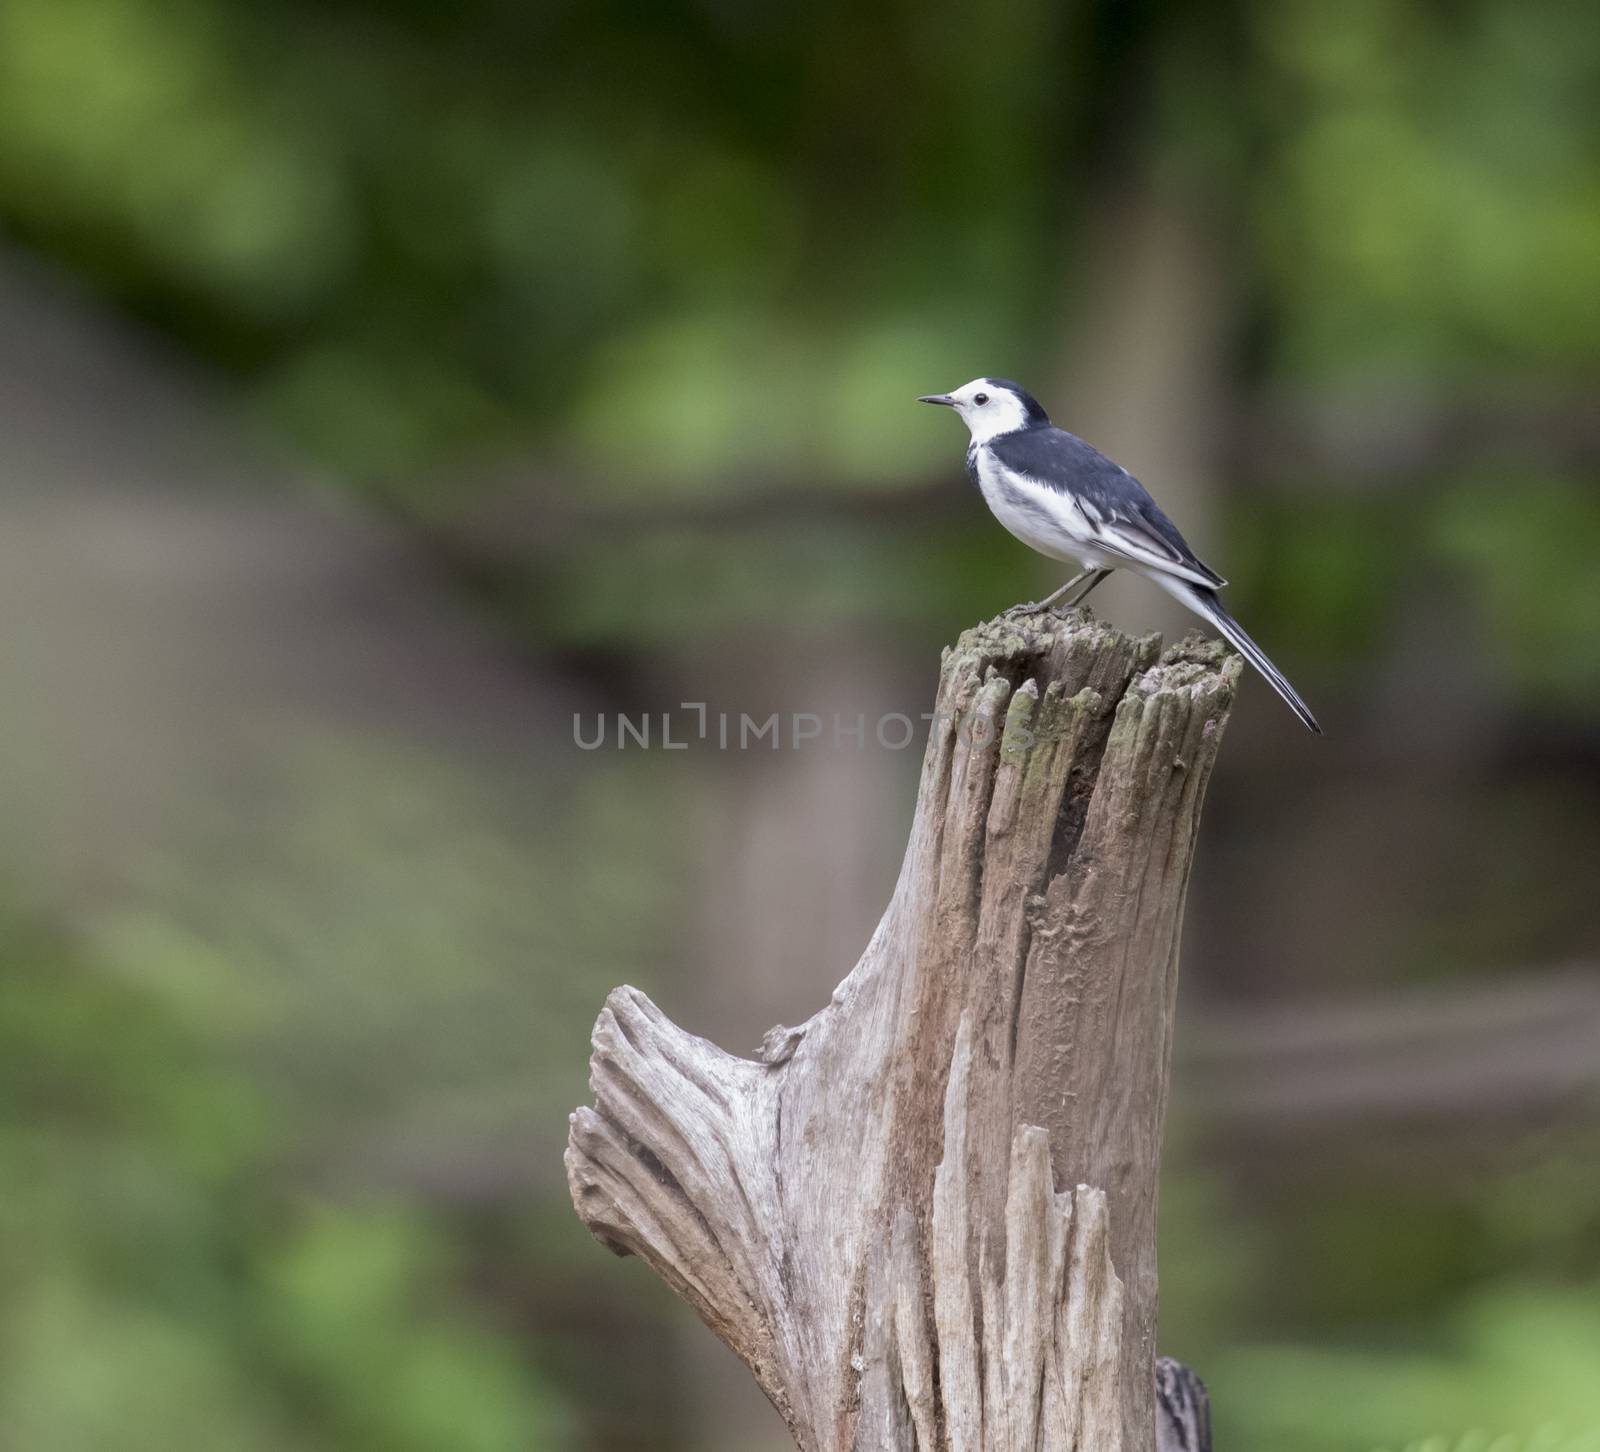 Image of a magpie perched on the branch